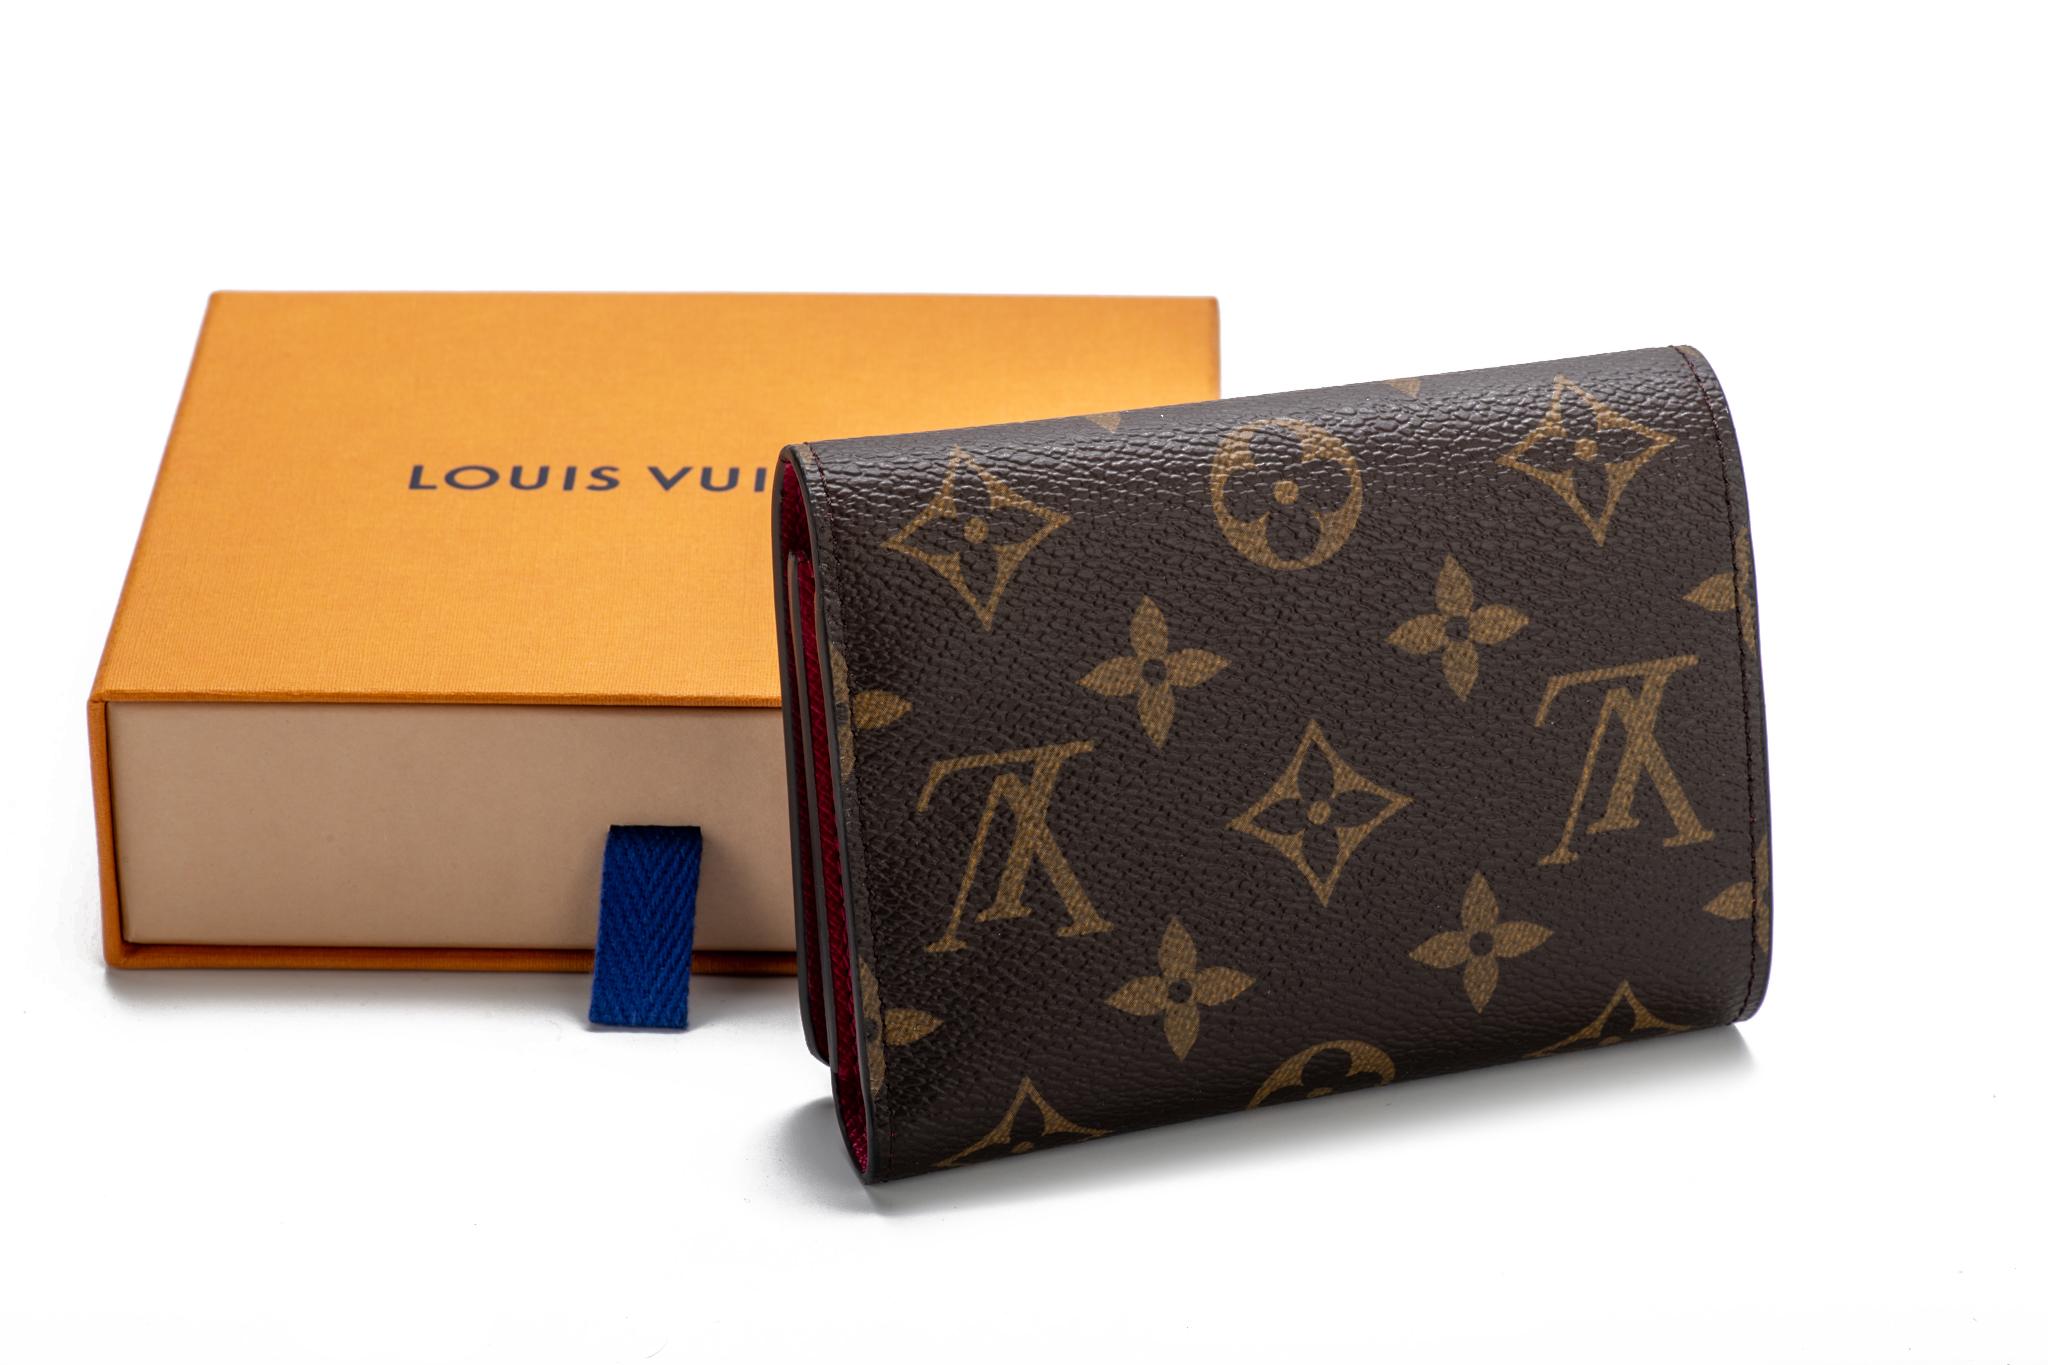 Vuitton Christmas 2020 limited edition rollercoaster wallet . Brand new in box with dust cover.